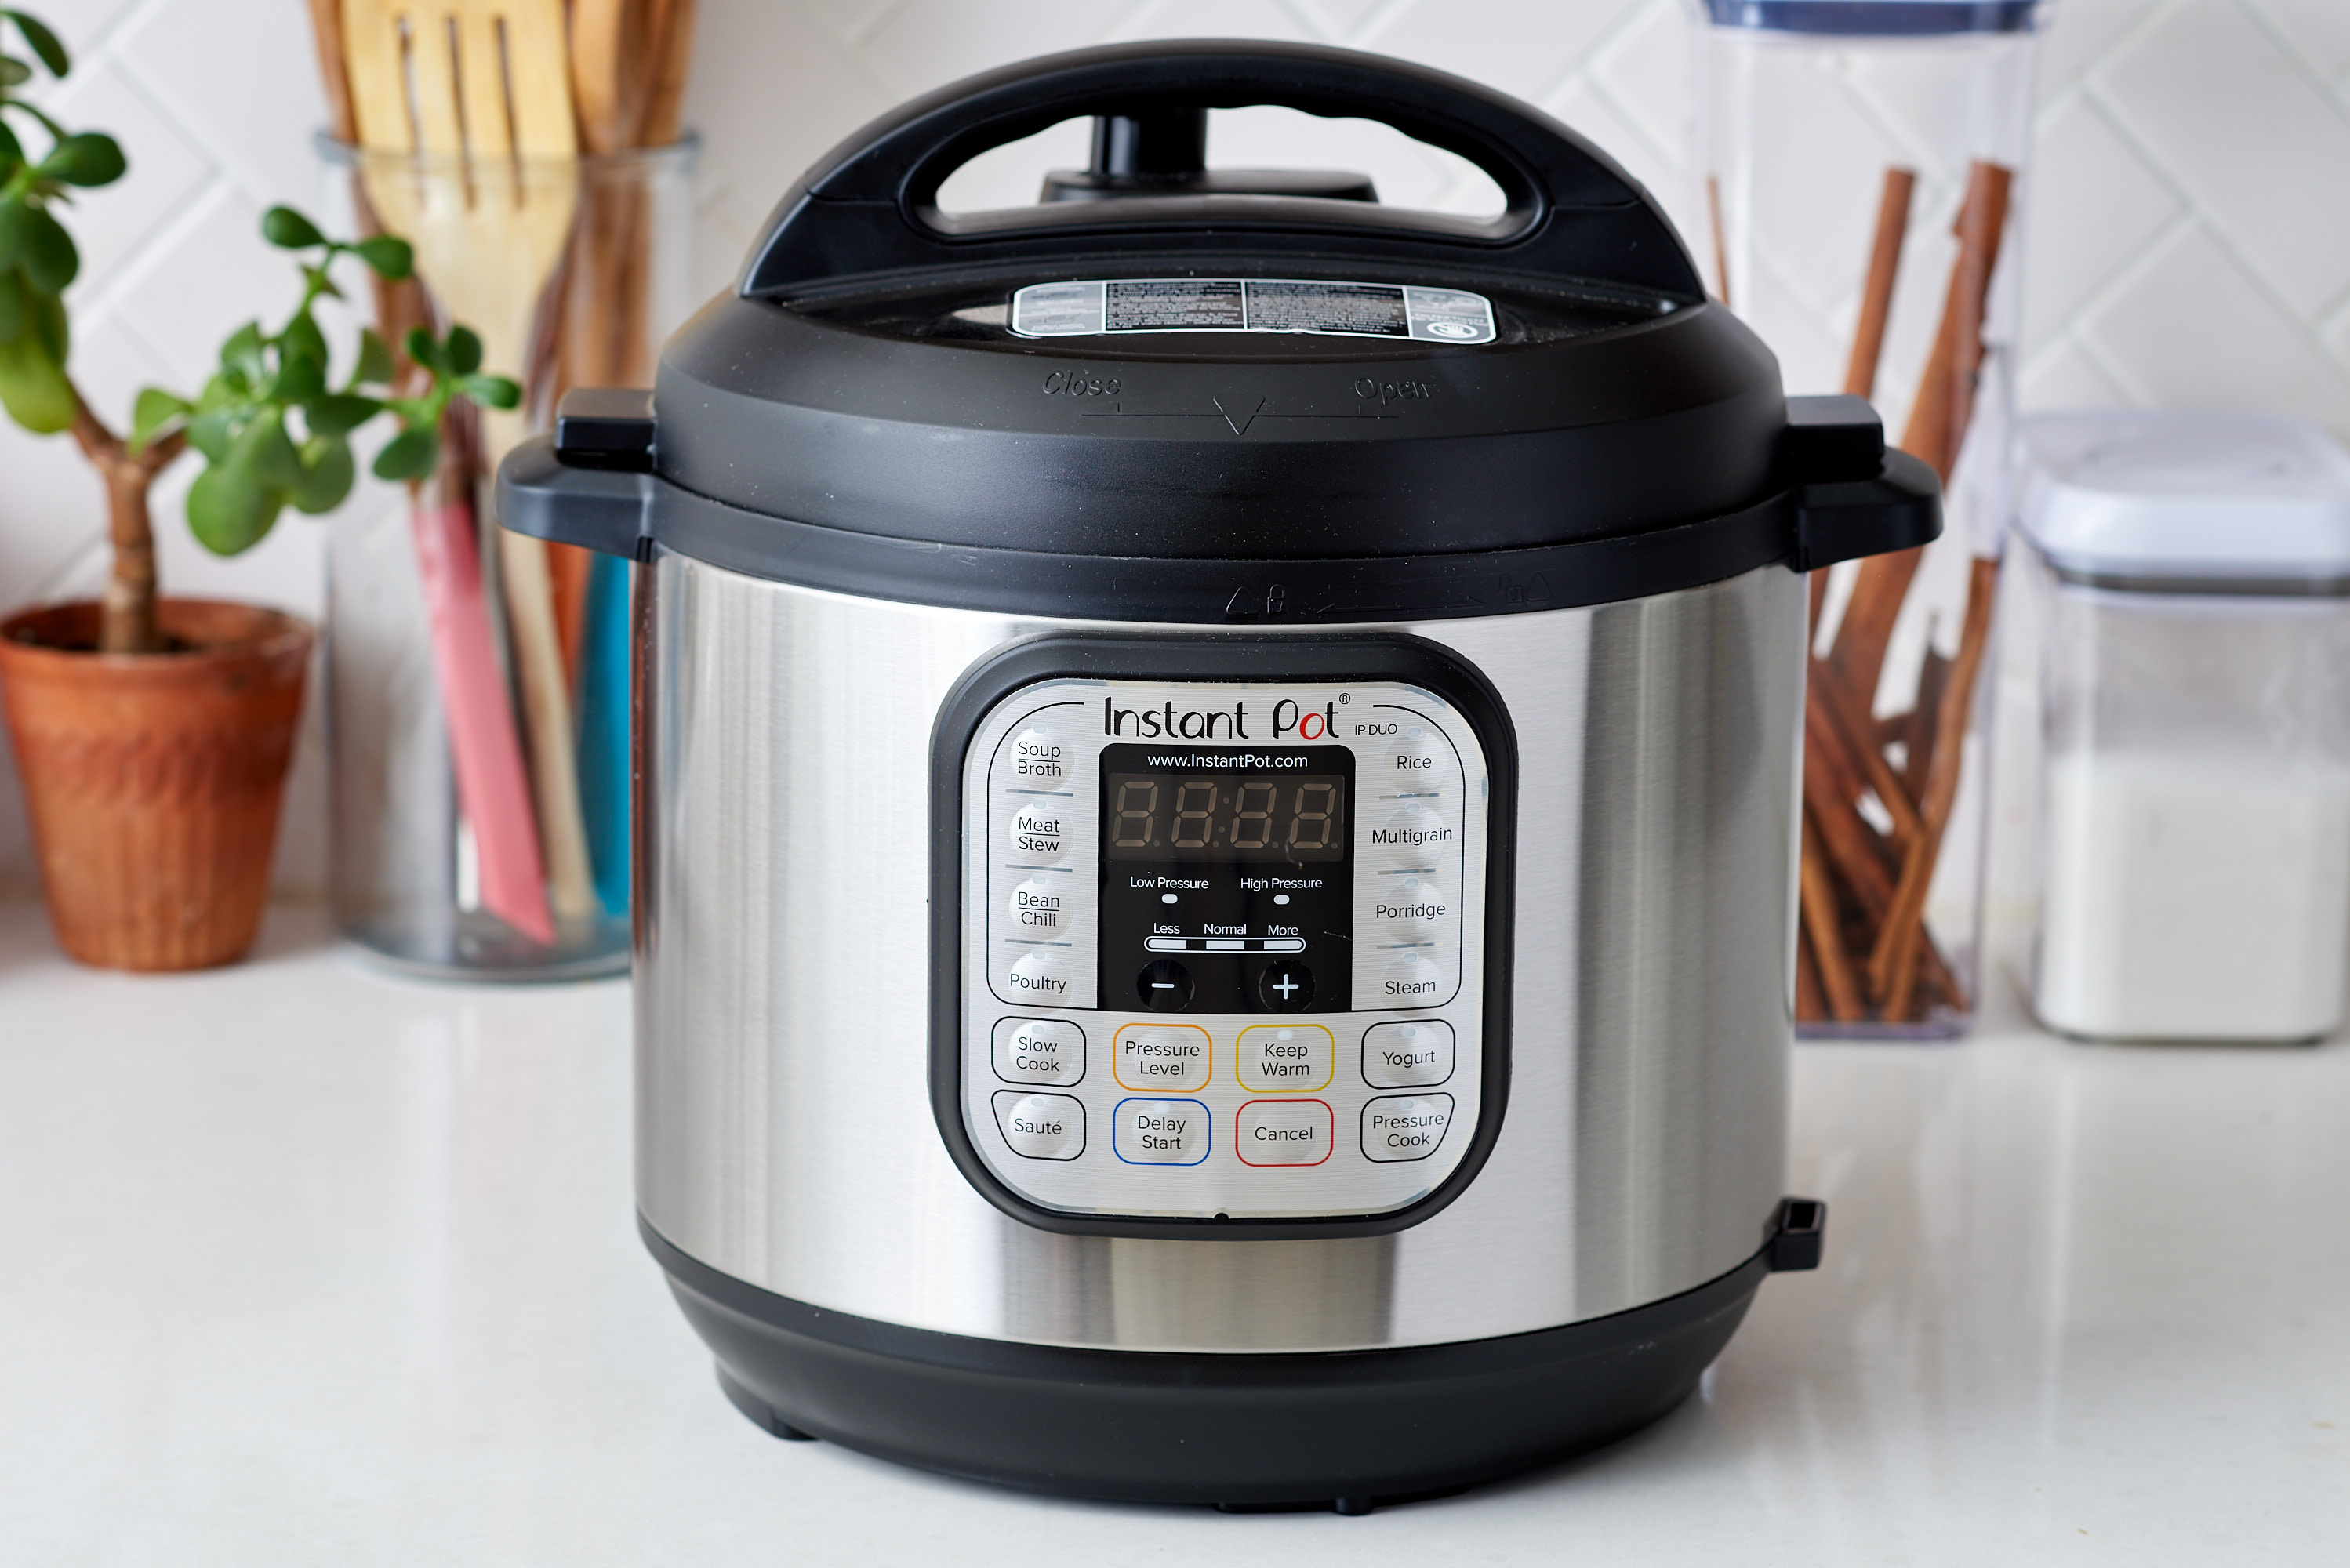 New Instant Pot - Information Guide